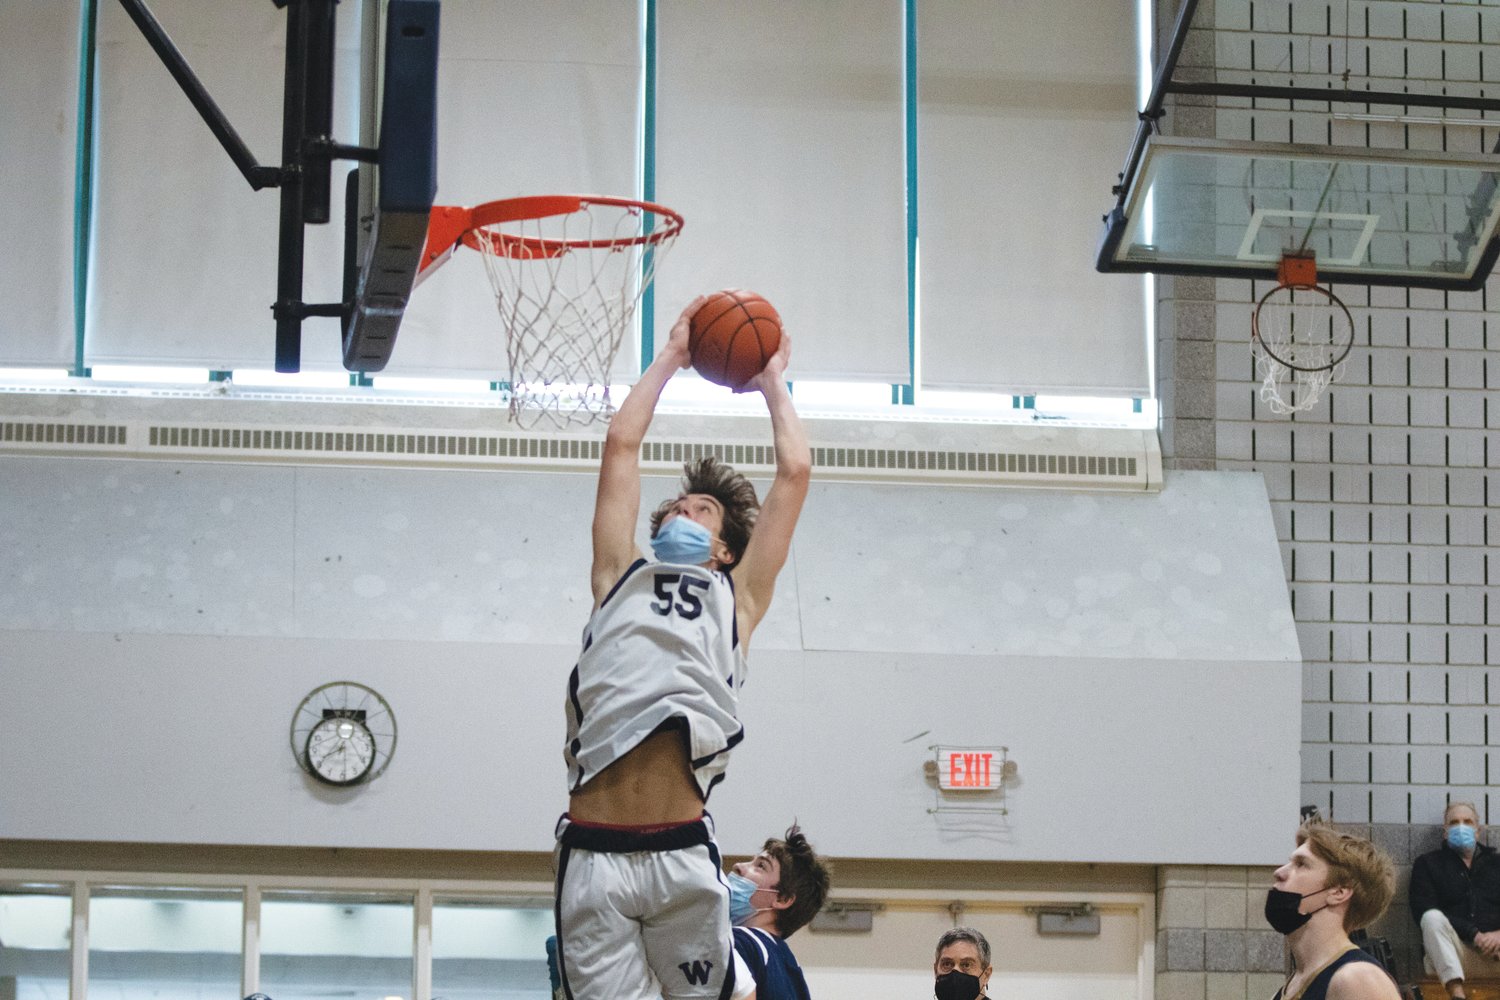 Jack Halik goes up for a dunk attempt against Tri-County in the Whalers' 69-25 home win on Sunday